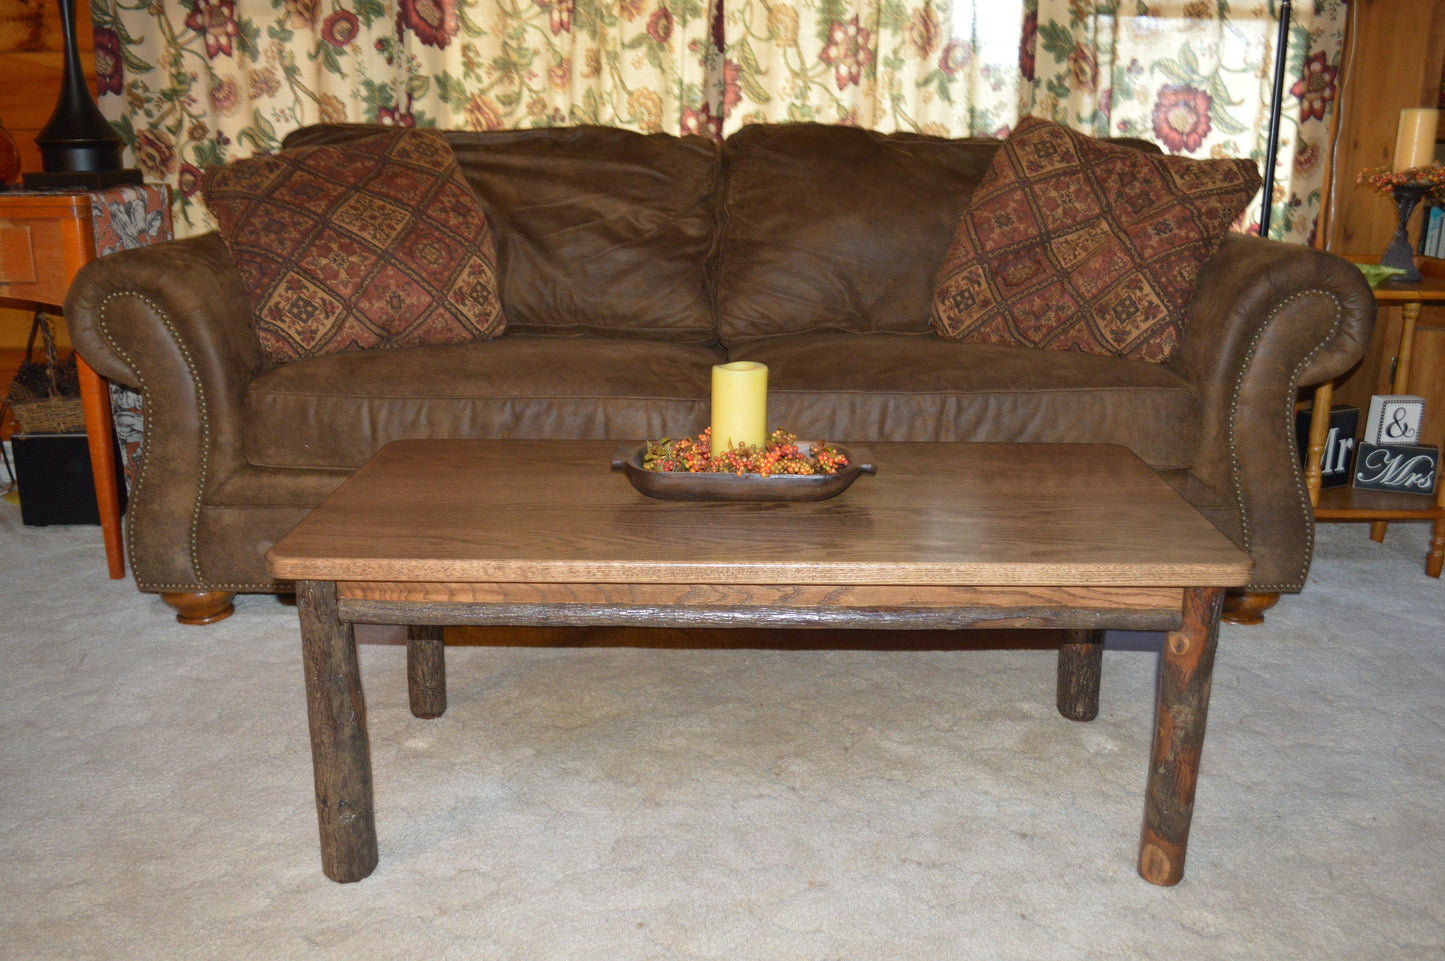 A&L Furniture Co. Amish Hickory Solid Wood Coffee Table - LEAD TIME TO SHIP 10 BUSINESS DAYS